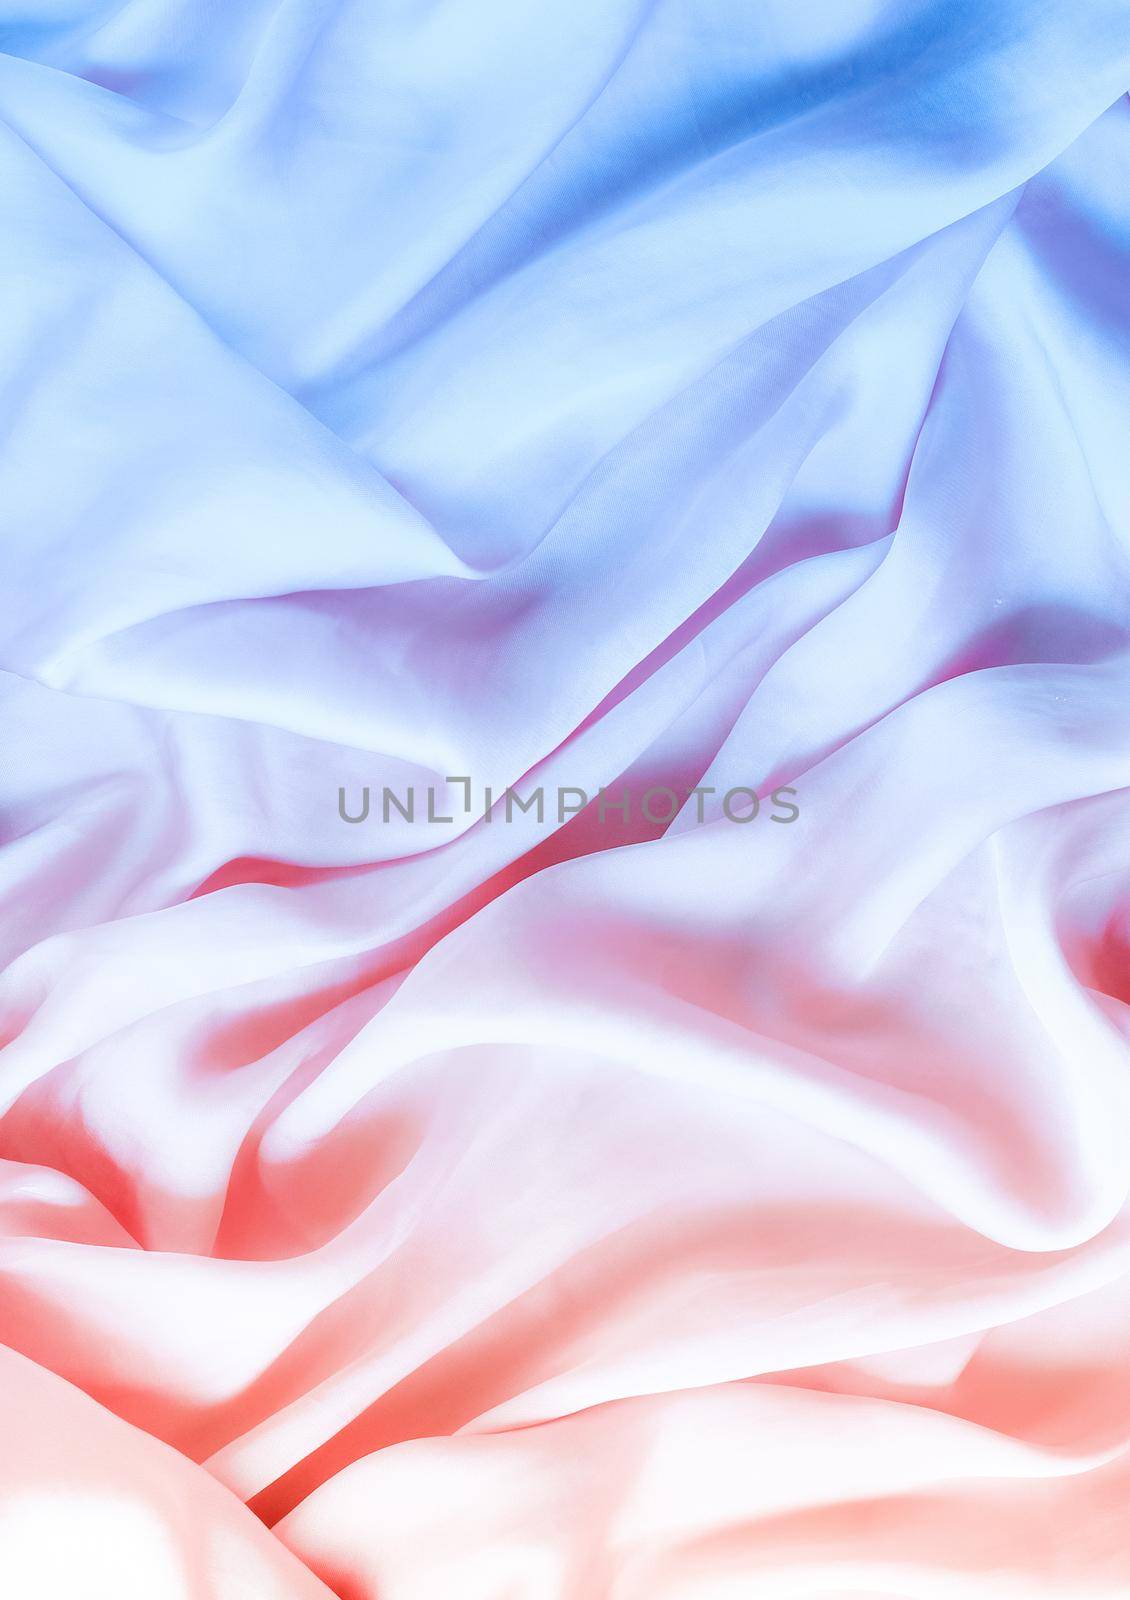 Neon soft silk waves, flatlay - elegant fabric textures, abstract backgrounds and modern pastel colours concept. Feel the sense of timeless luxury